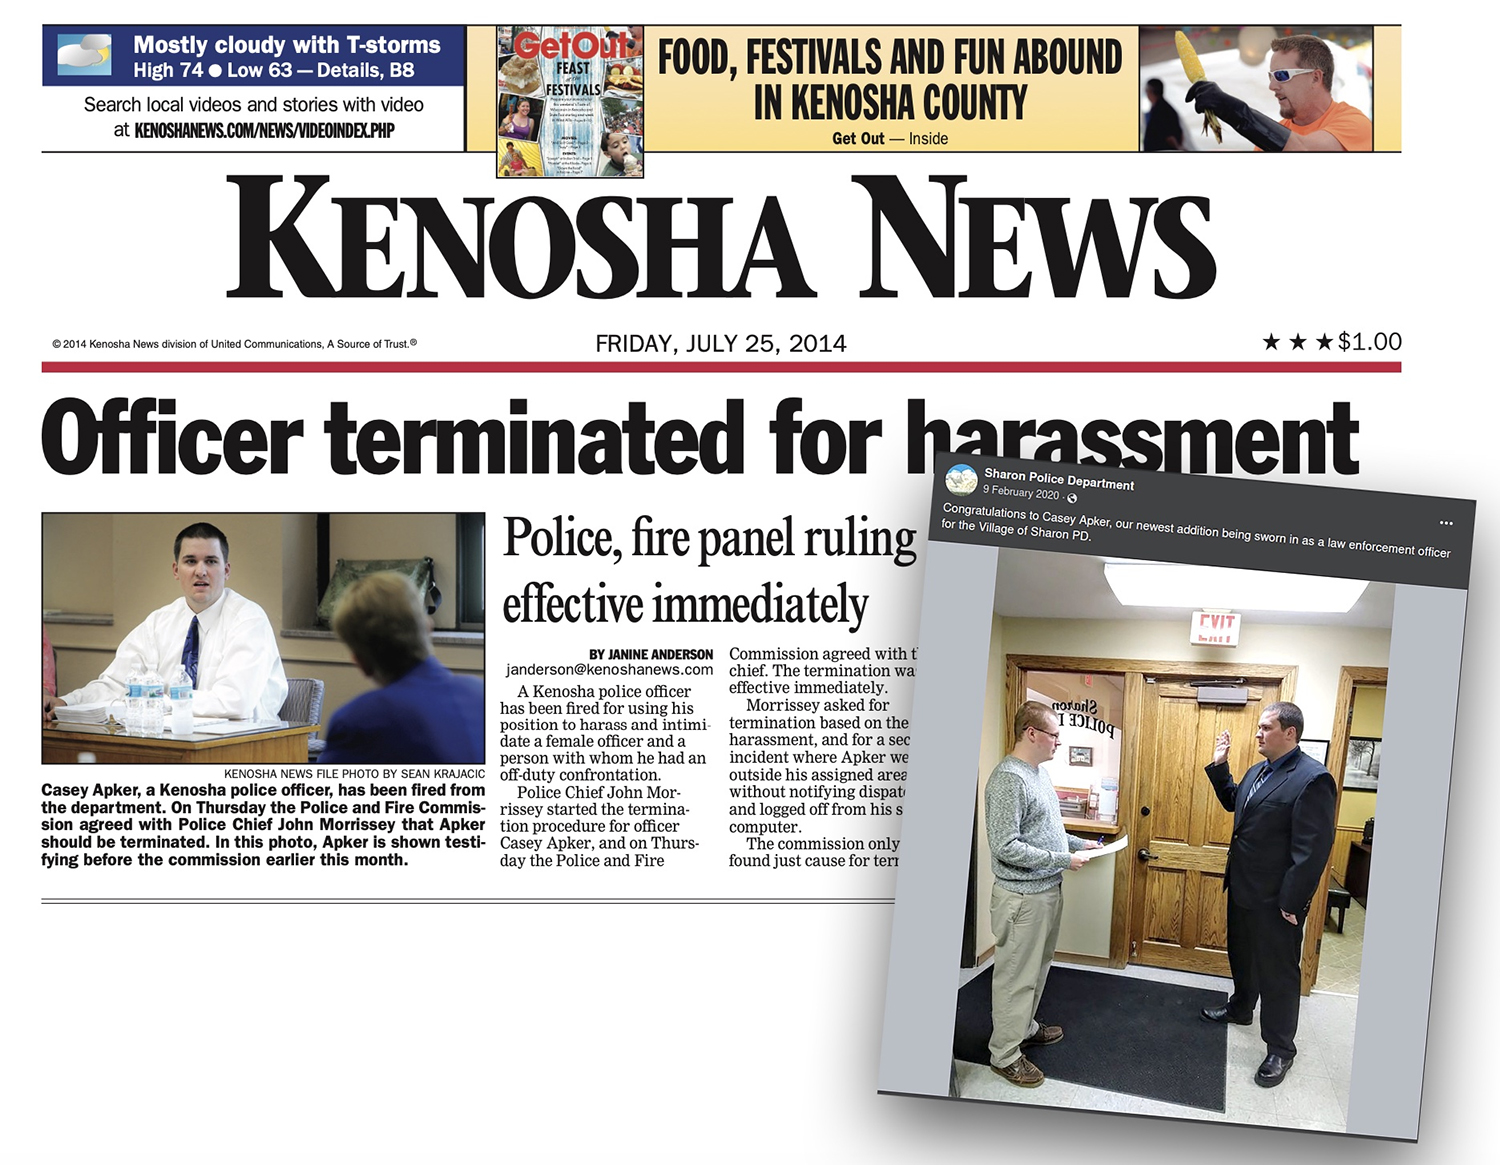 An image showing the front page of the Friday, July 25, 2014 edition of the "Kenosha News" leads with the headline "Officer terminated for harassment" and the sub-headline "Police, fire panel ruling effective immediately."